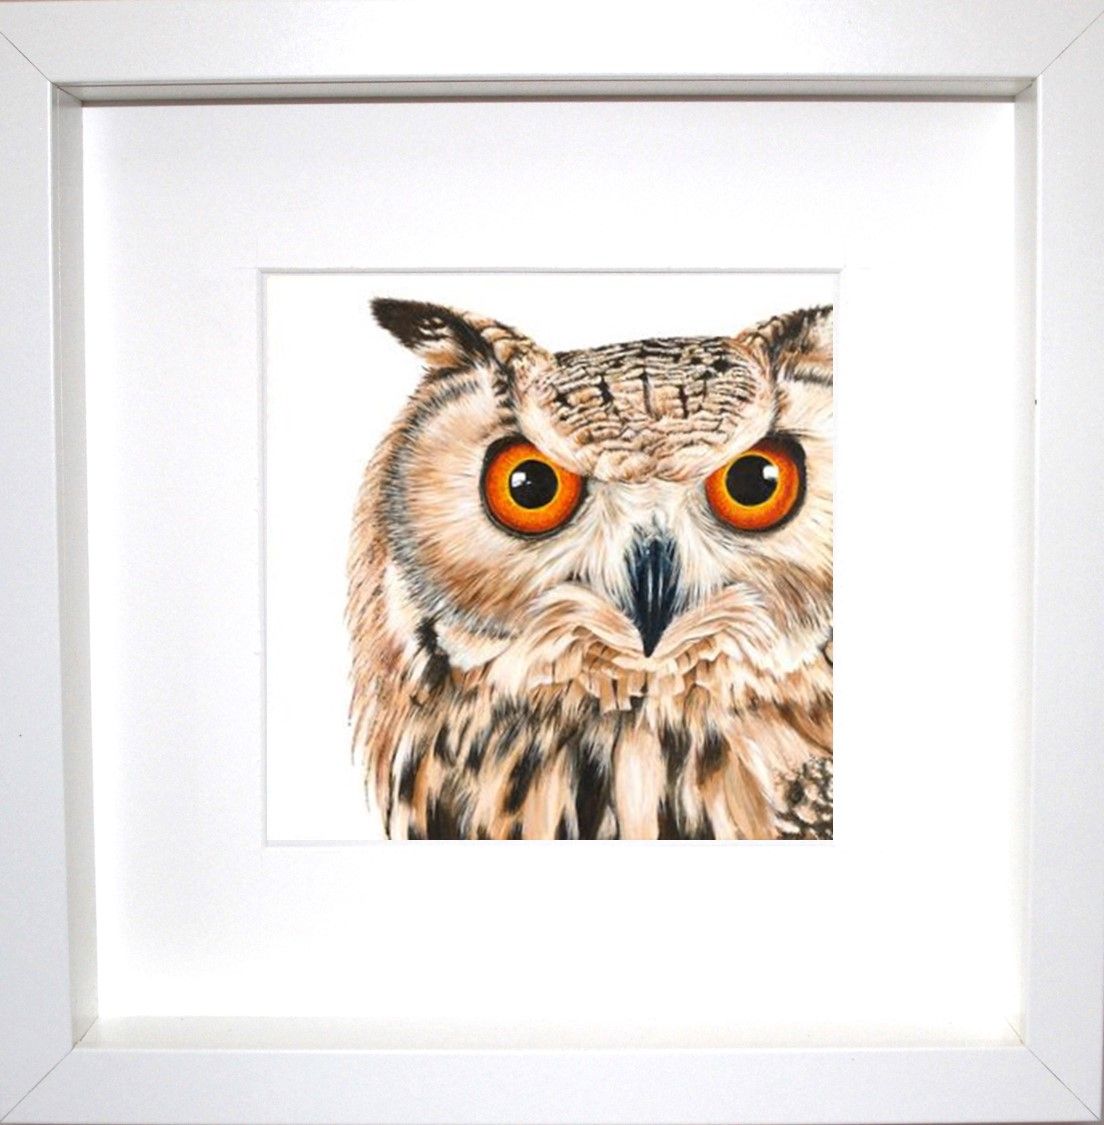 Owl – Print Framed – Hashtag Within The Owl Framed Art Prints (View 1 of 15)